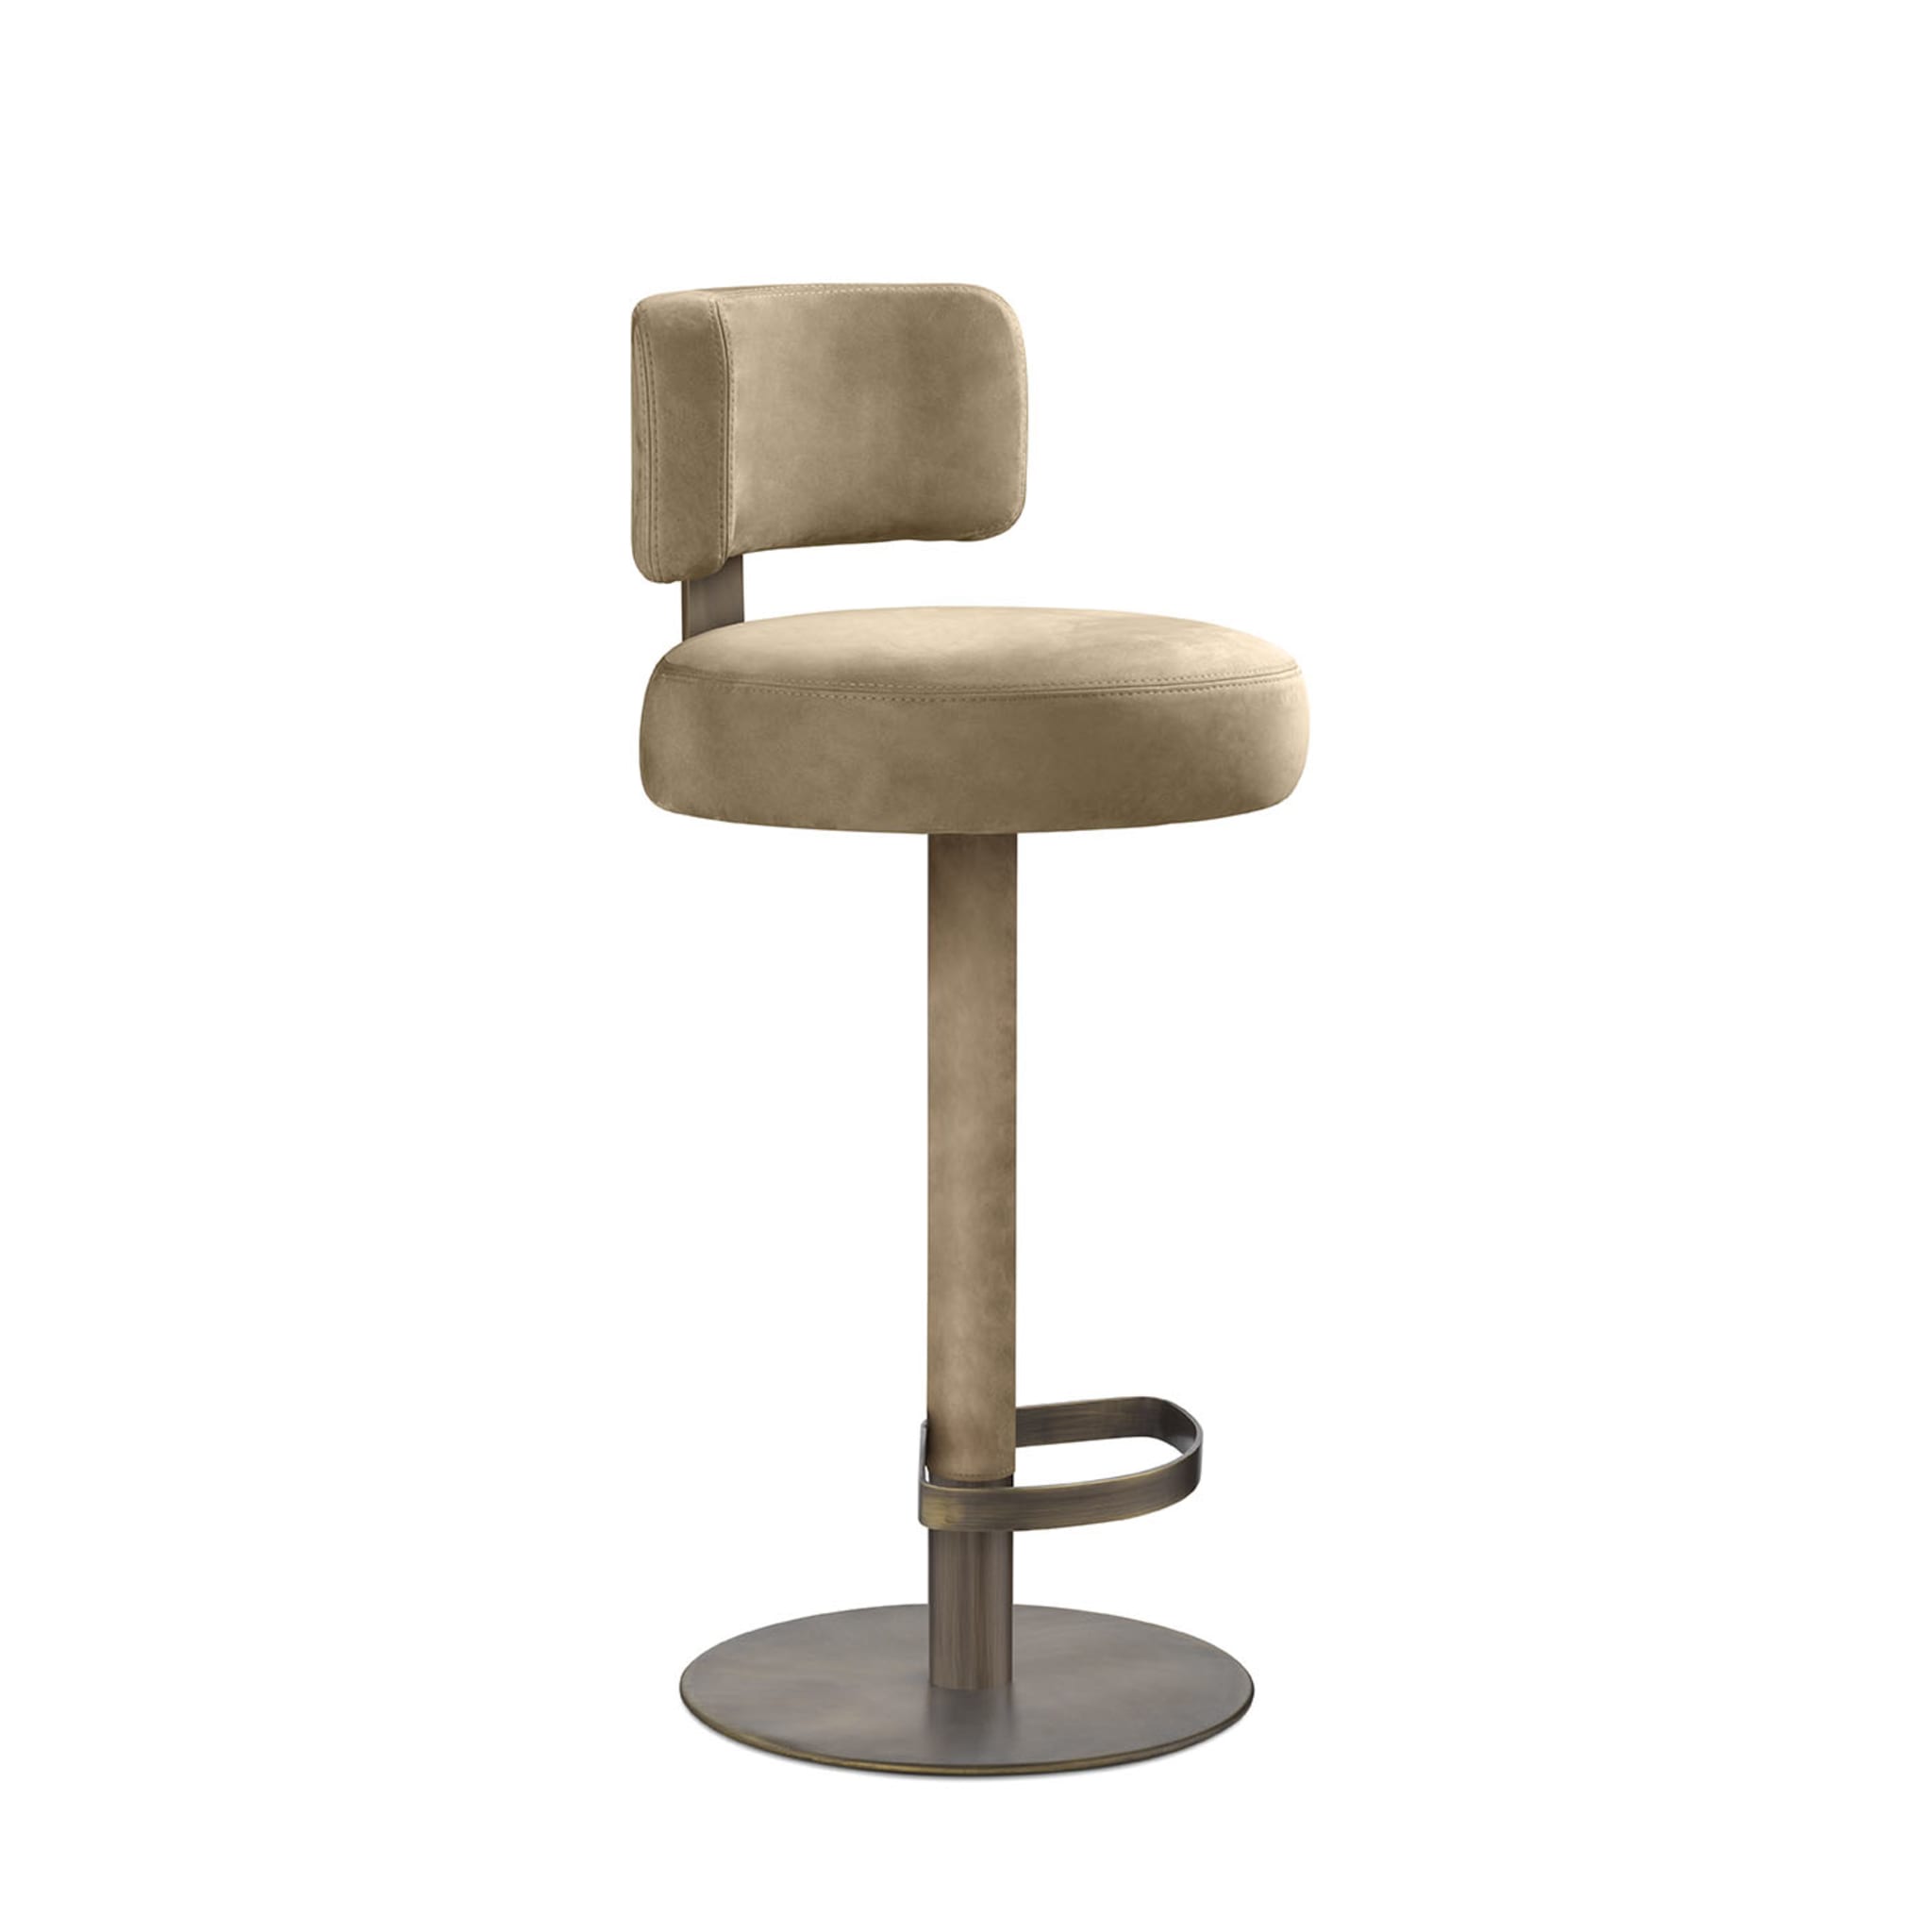 Alfred fixed Bar Stool - Alternative view 3